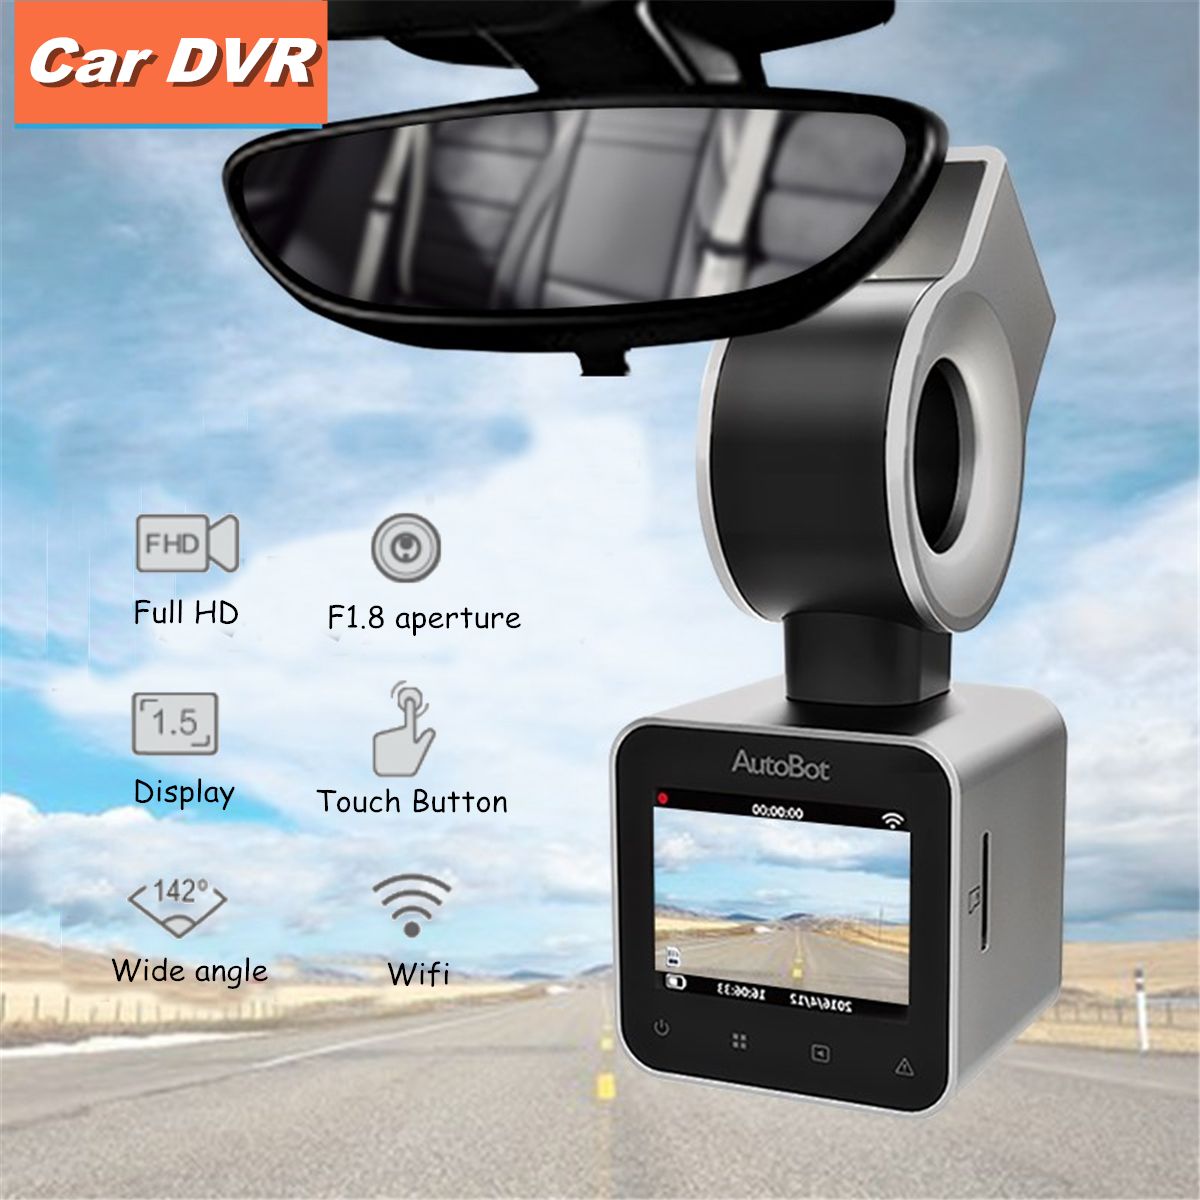 15inch-Smart-Car-DVR-Video-Camera-HD-1080P-Driving-Recorder-WiFi-Dash-Cam-Support-Night-Vision-Voice-1636721